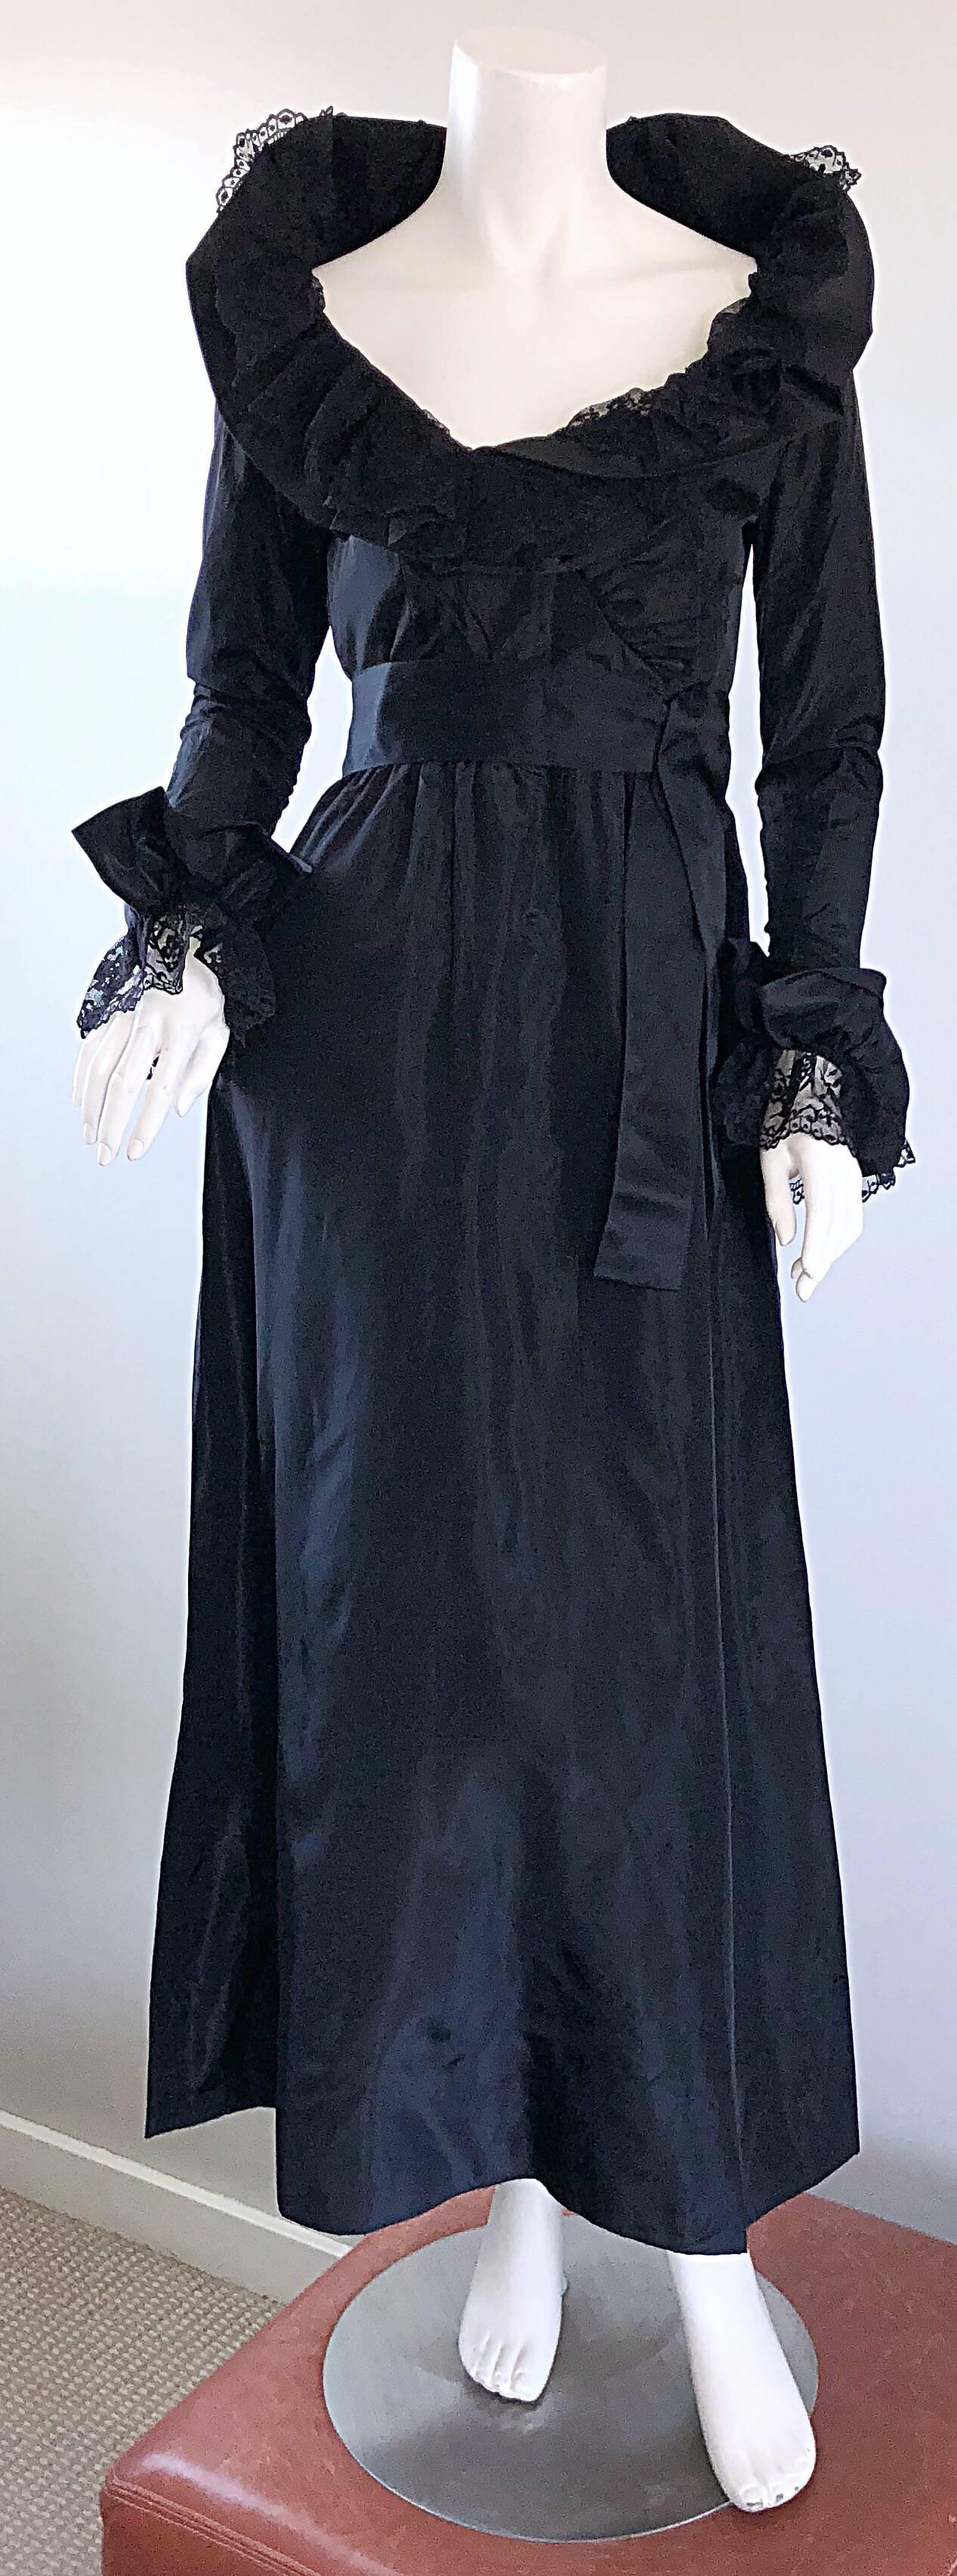 Beautiful vintage BILL BLASS couture black silk taffeta and lace evening gown! Features luxurious black silk taffeta, with black French lace details throughout. Ruffled taffeta collar features a lace overlay and a hidden fabric covered wire on each